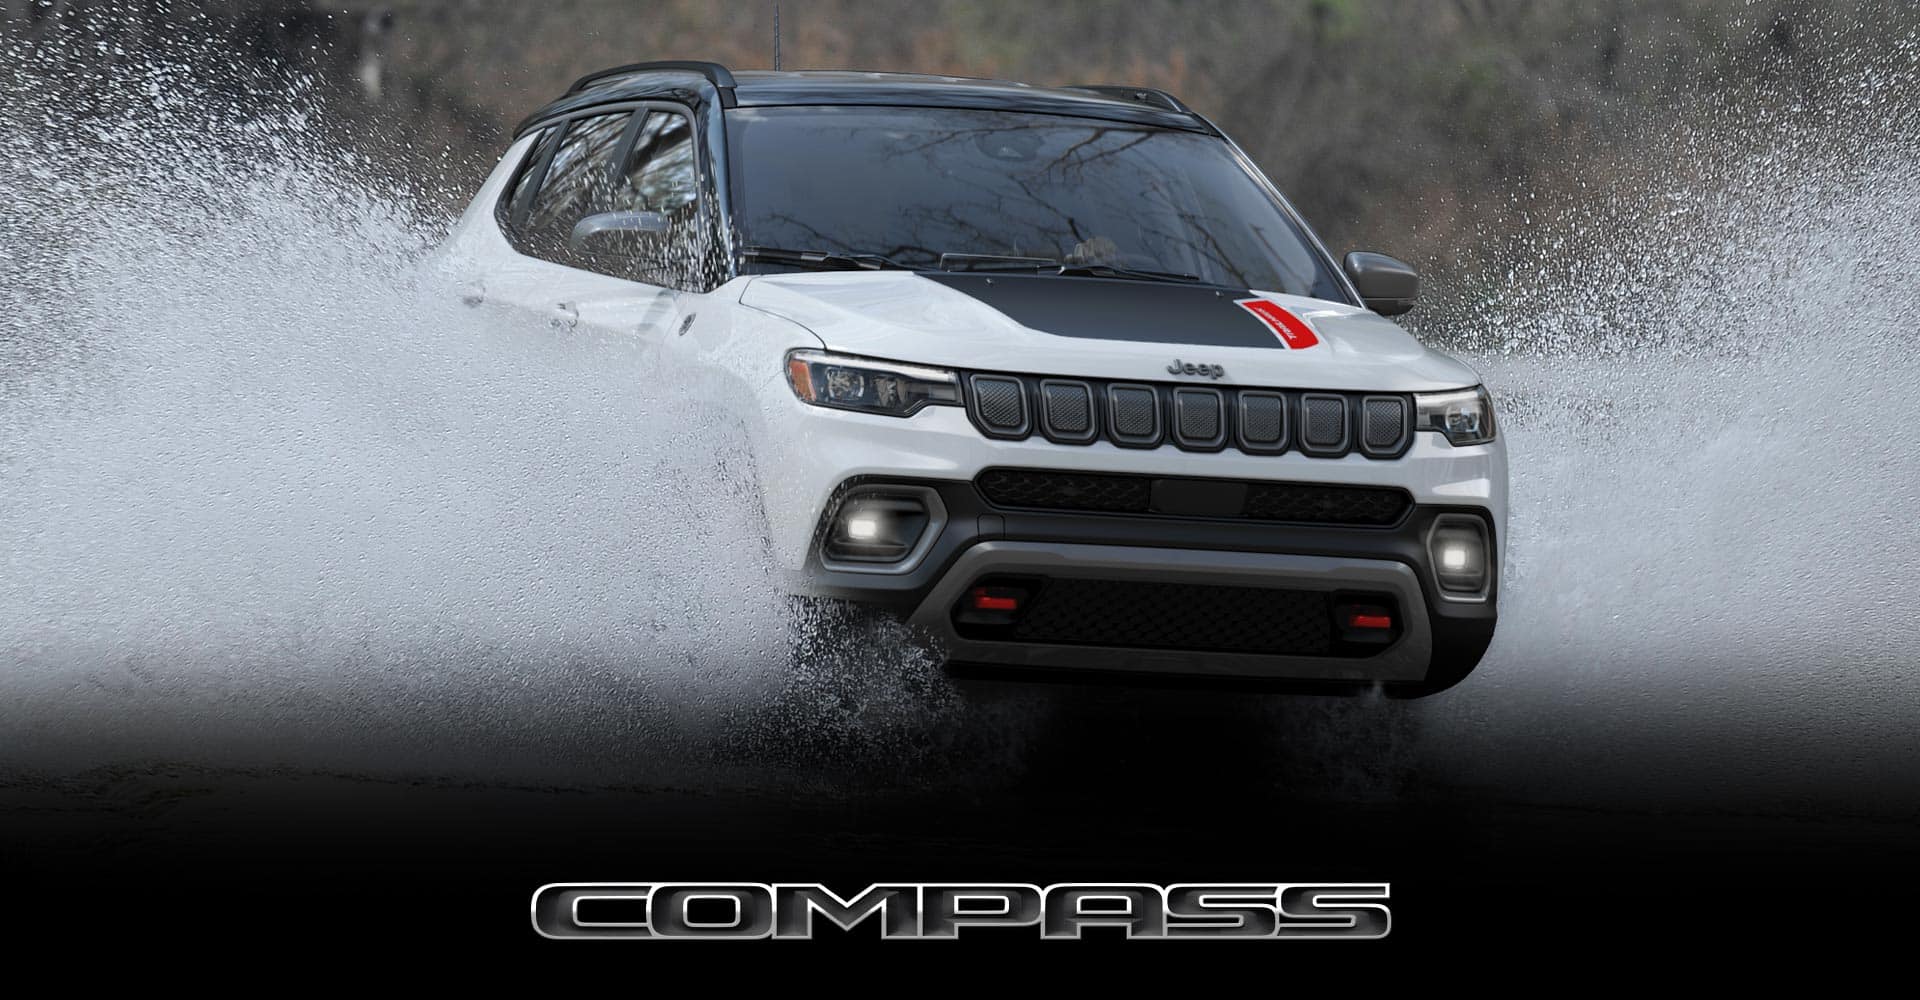 An angled front view of a white 2022 Jeep Compass Trailhawk fording a stream, spraying water up the sides of the vehicle. Compass.